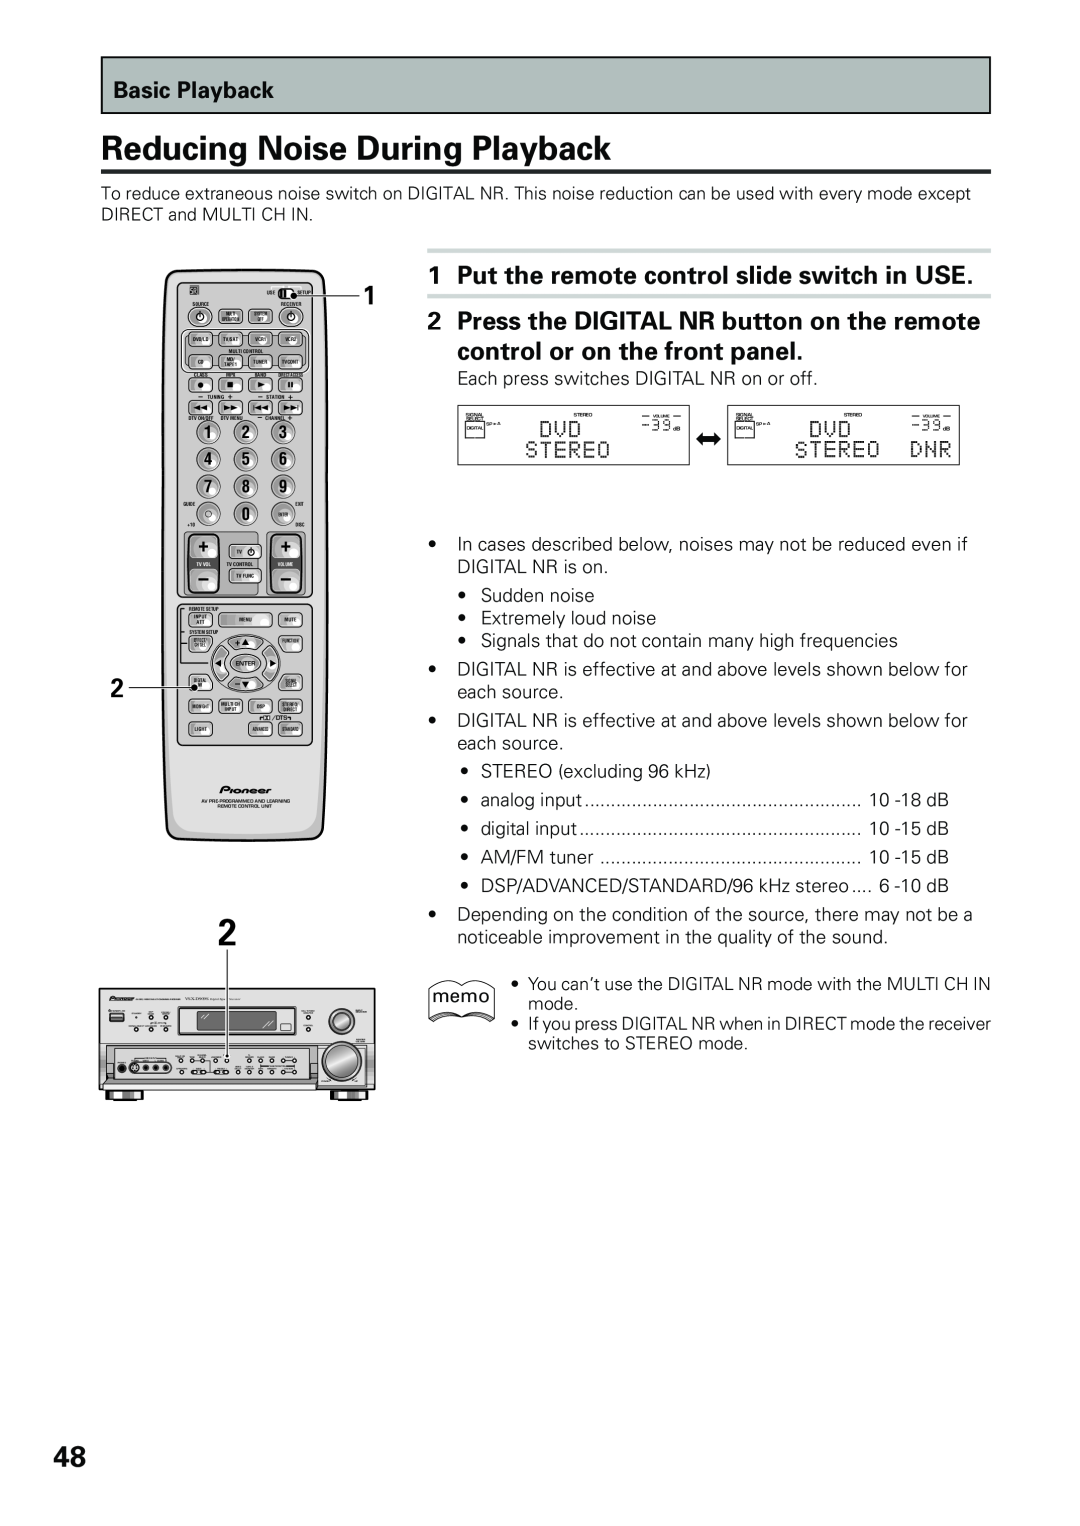 Pioneer VSX-D909S manual Reducing Noise During Playback, Put the remote control slide switch in USE, Basic Playback 